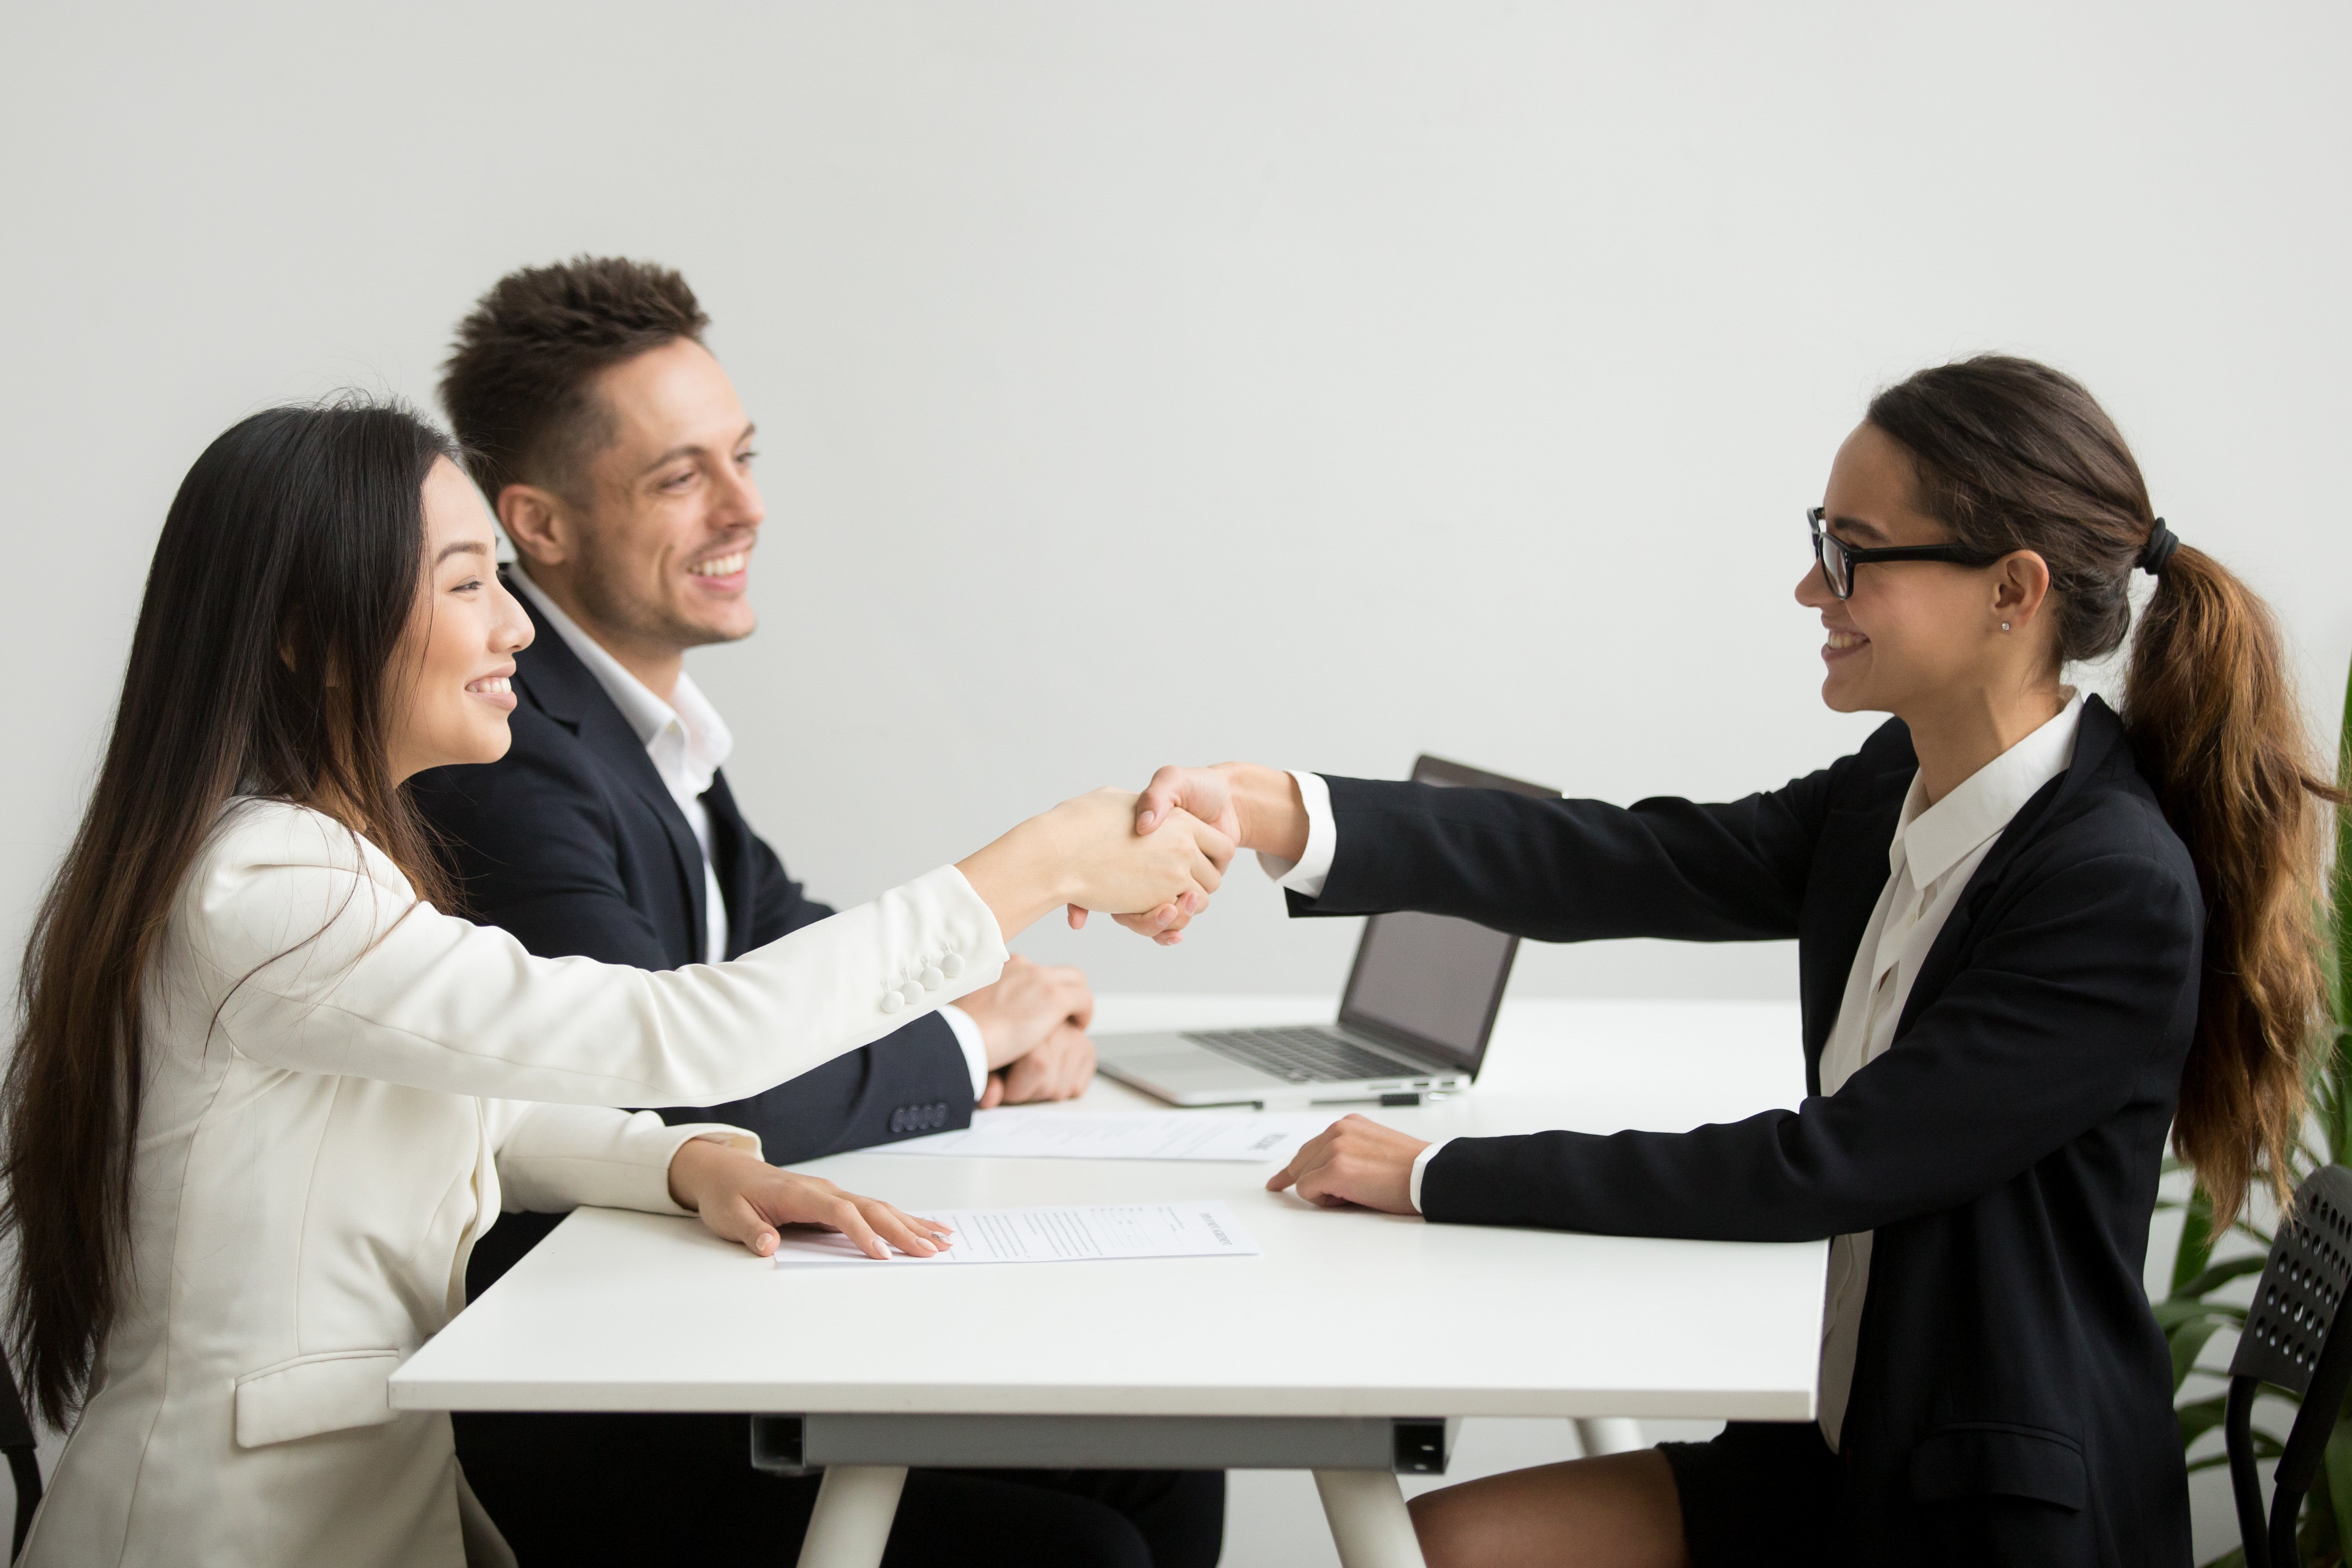 Employer and candidate shake hands in an interview